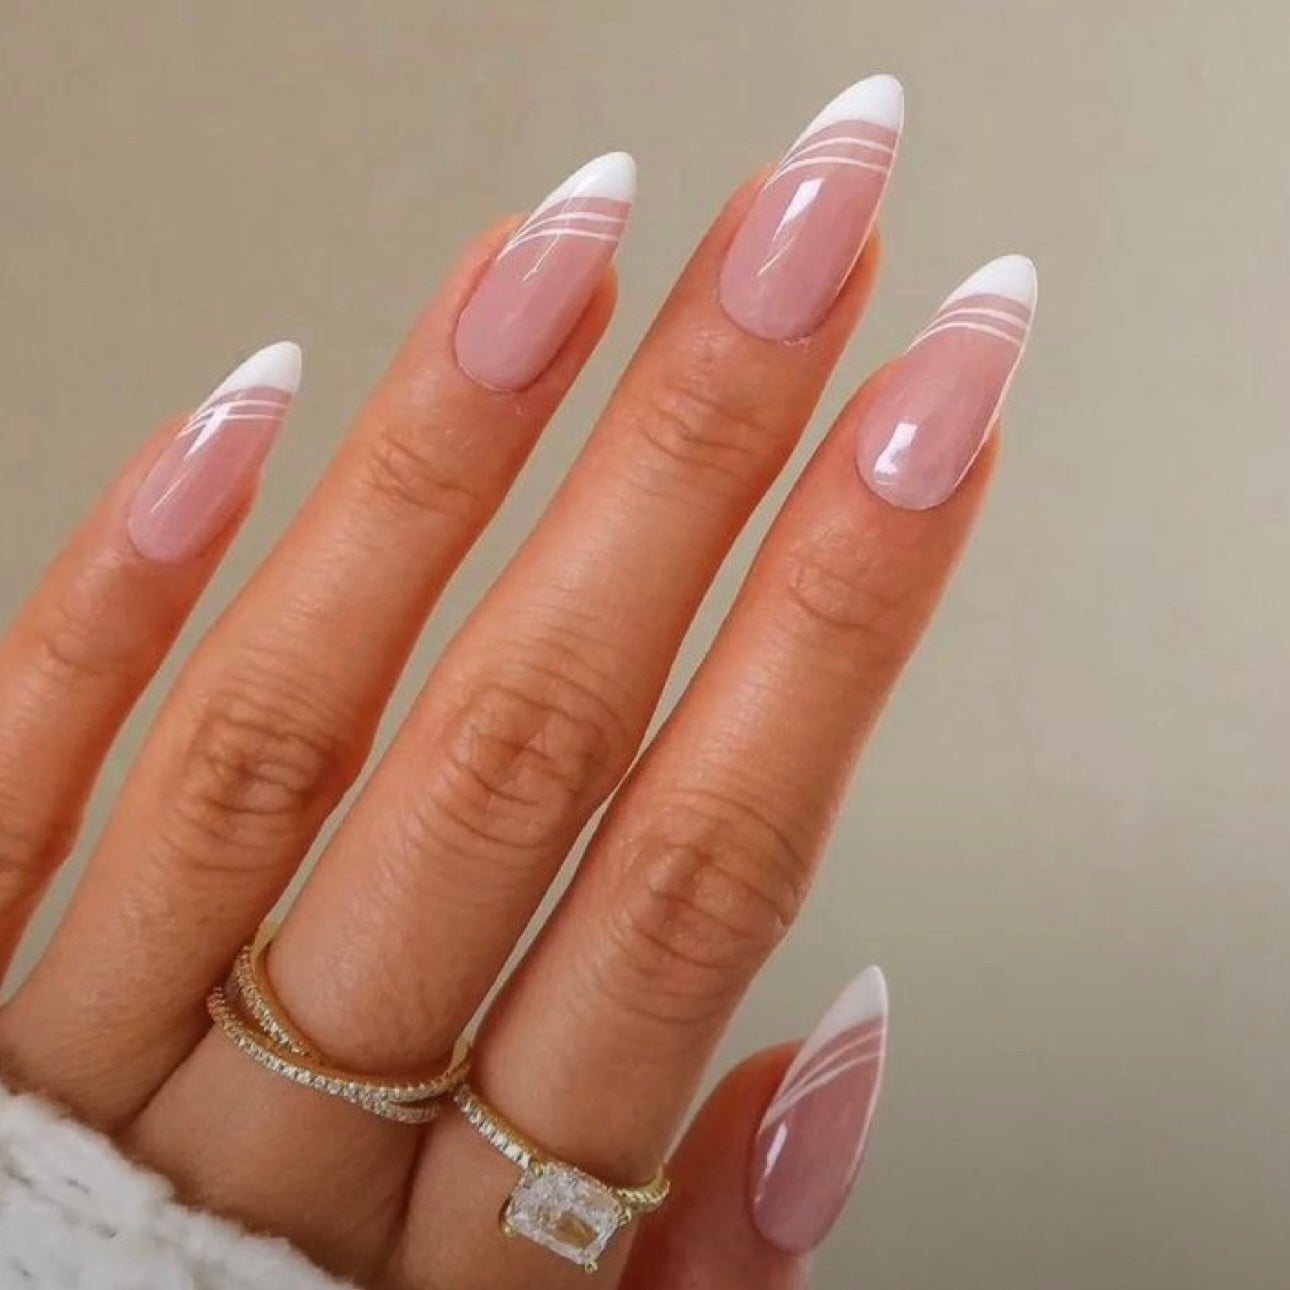 Brittle Nails: Symptoms, Causes, and Treatment